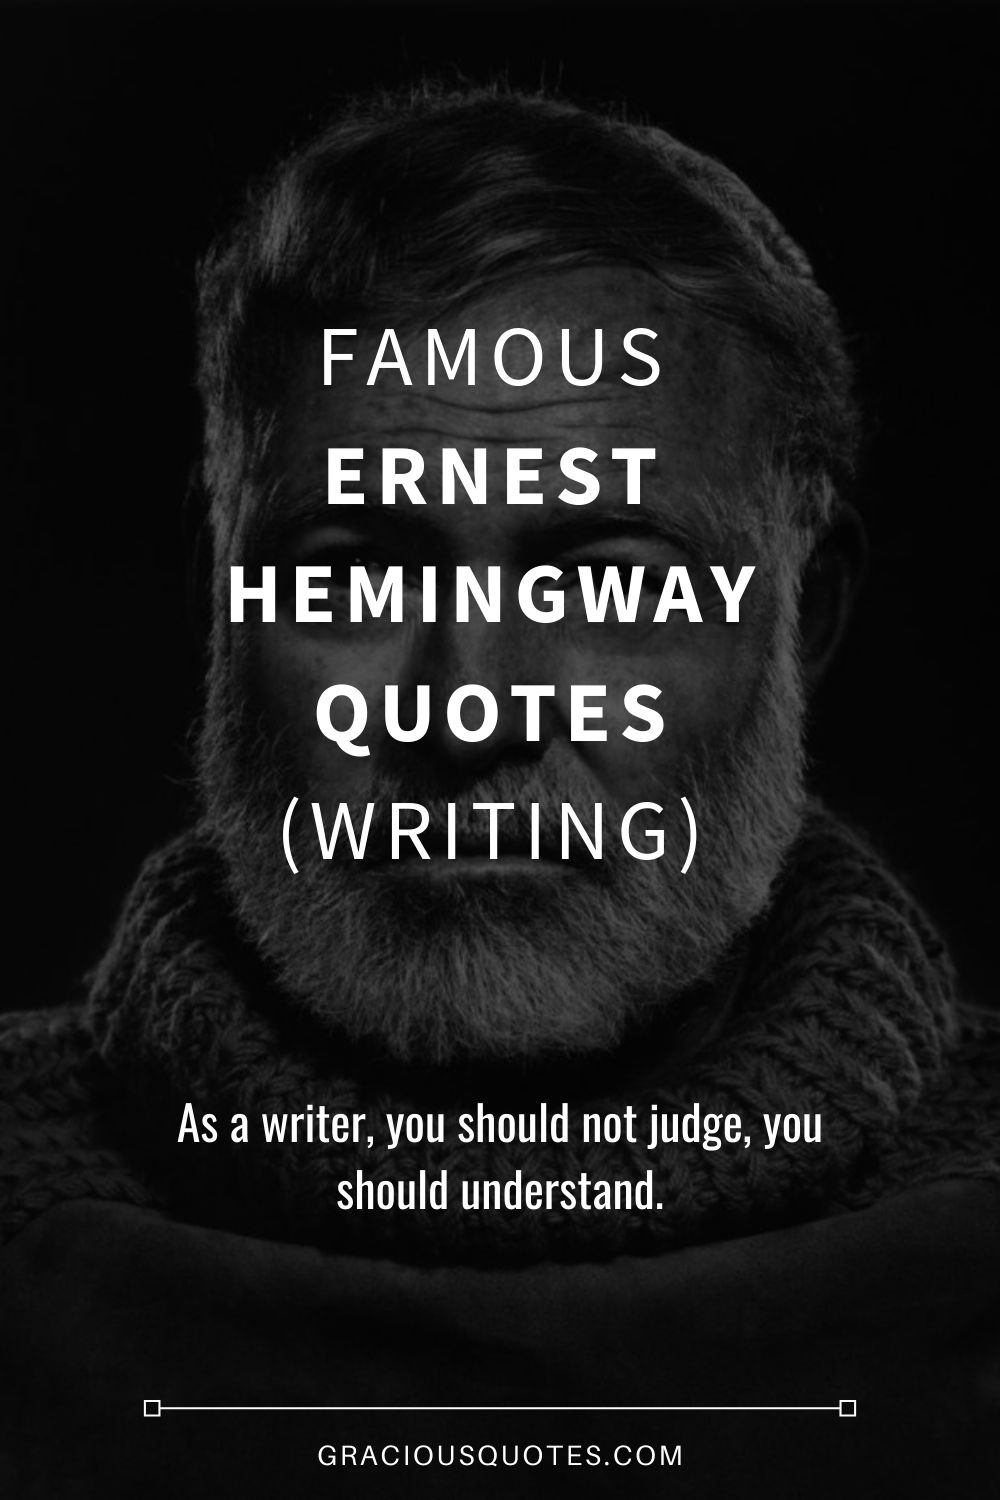 44 Famous Ernest Hemingway Quotes Writing